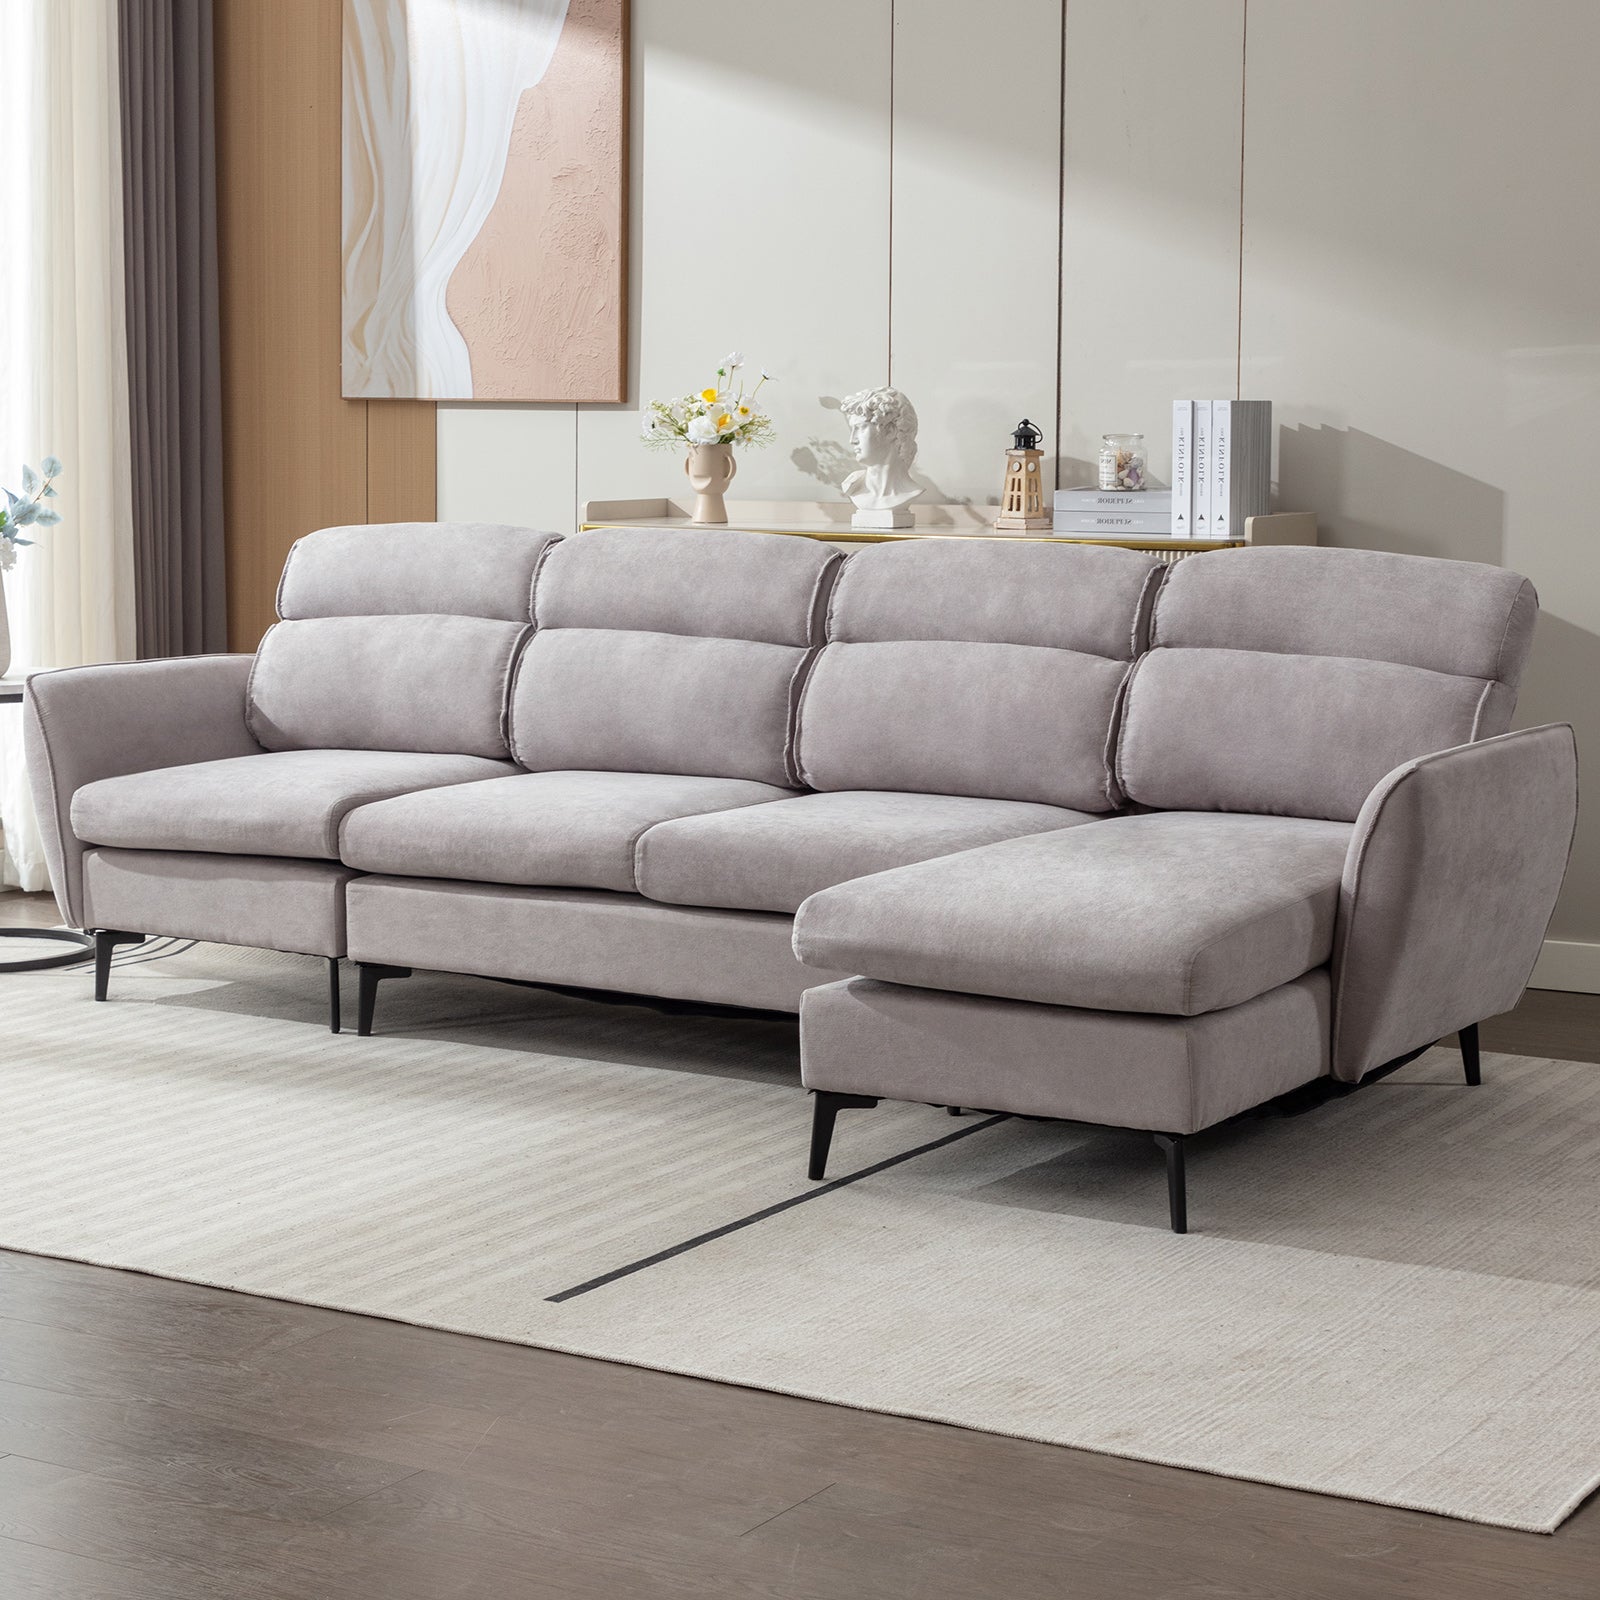 Mjkone Living Room Sofa Set, Linen Sofa Sectional Couches for Living Room with Spacious Seat and Sturdy Wooden Frame